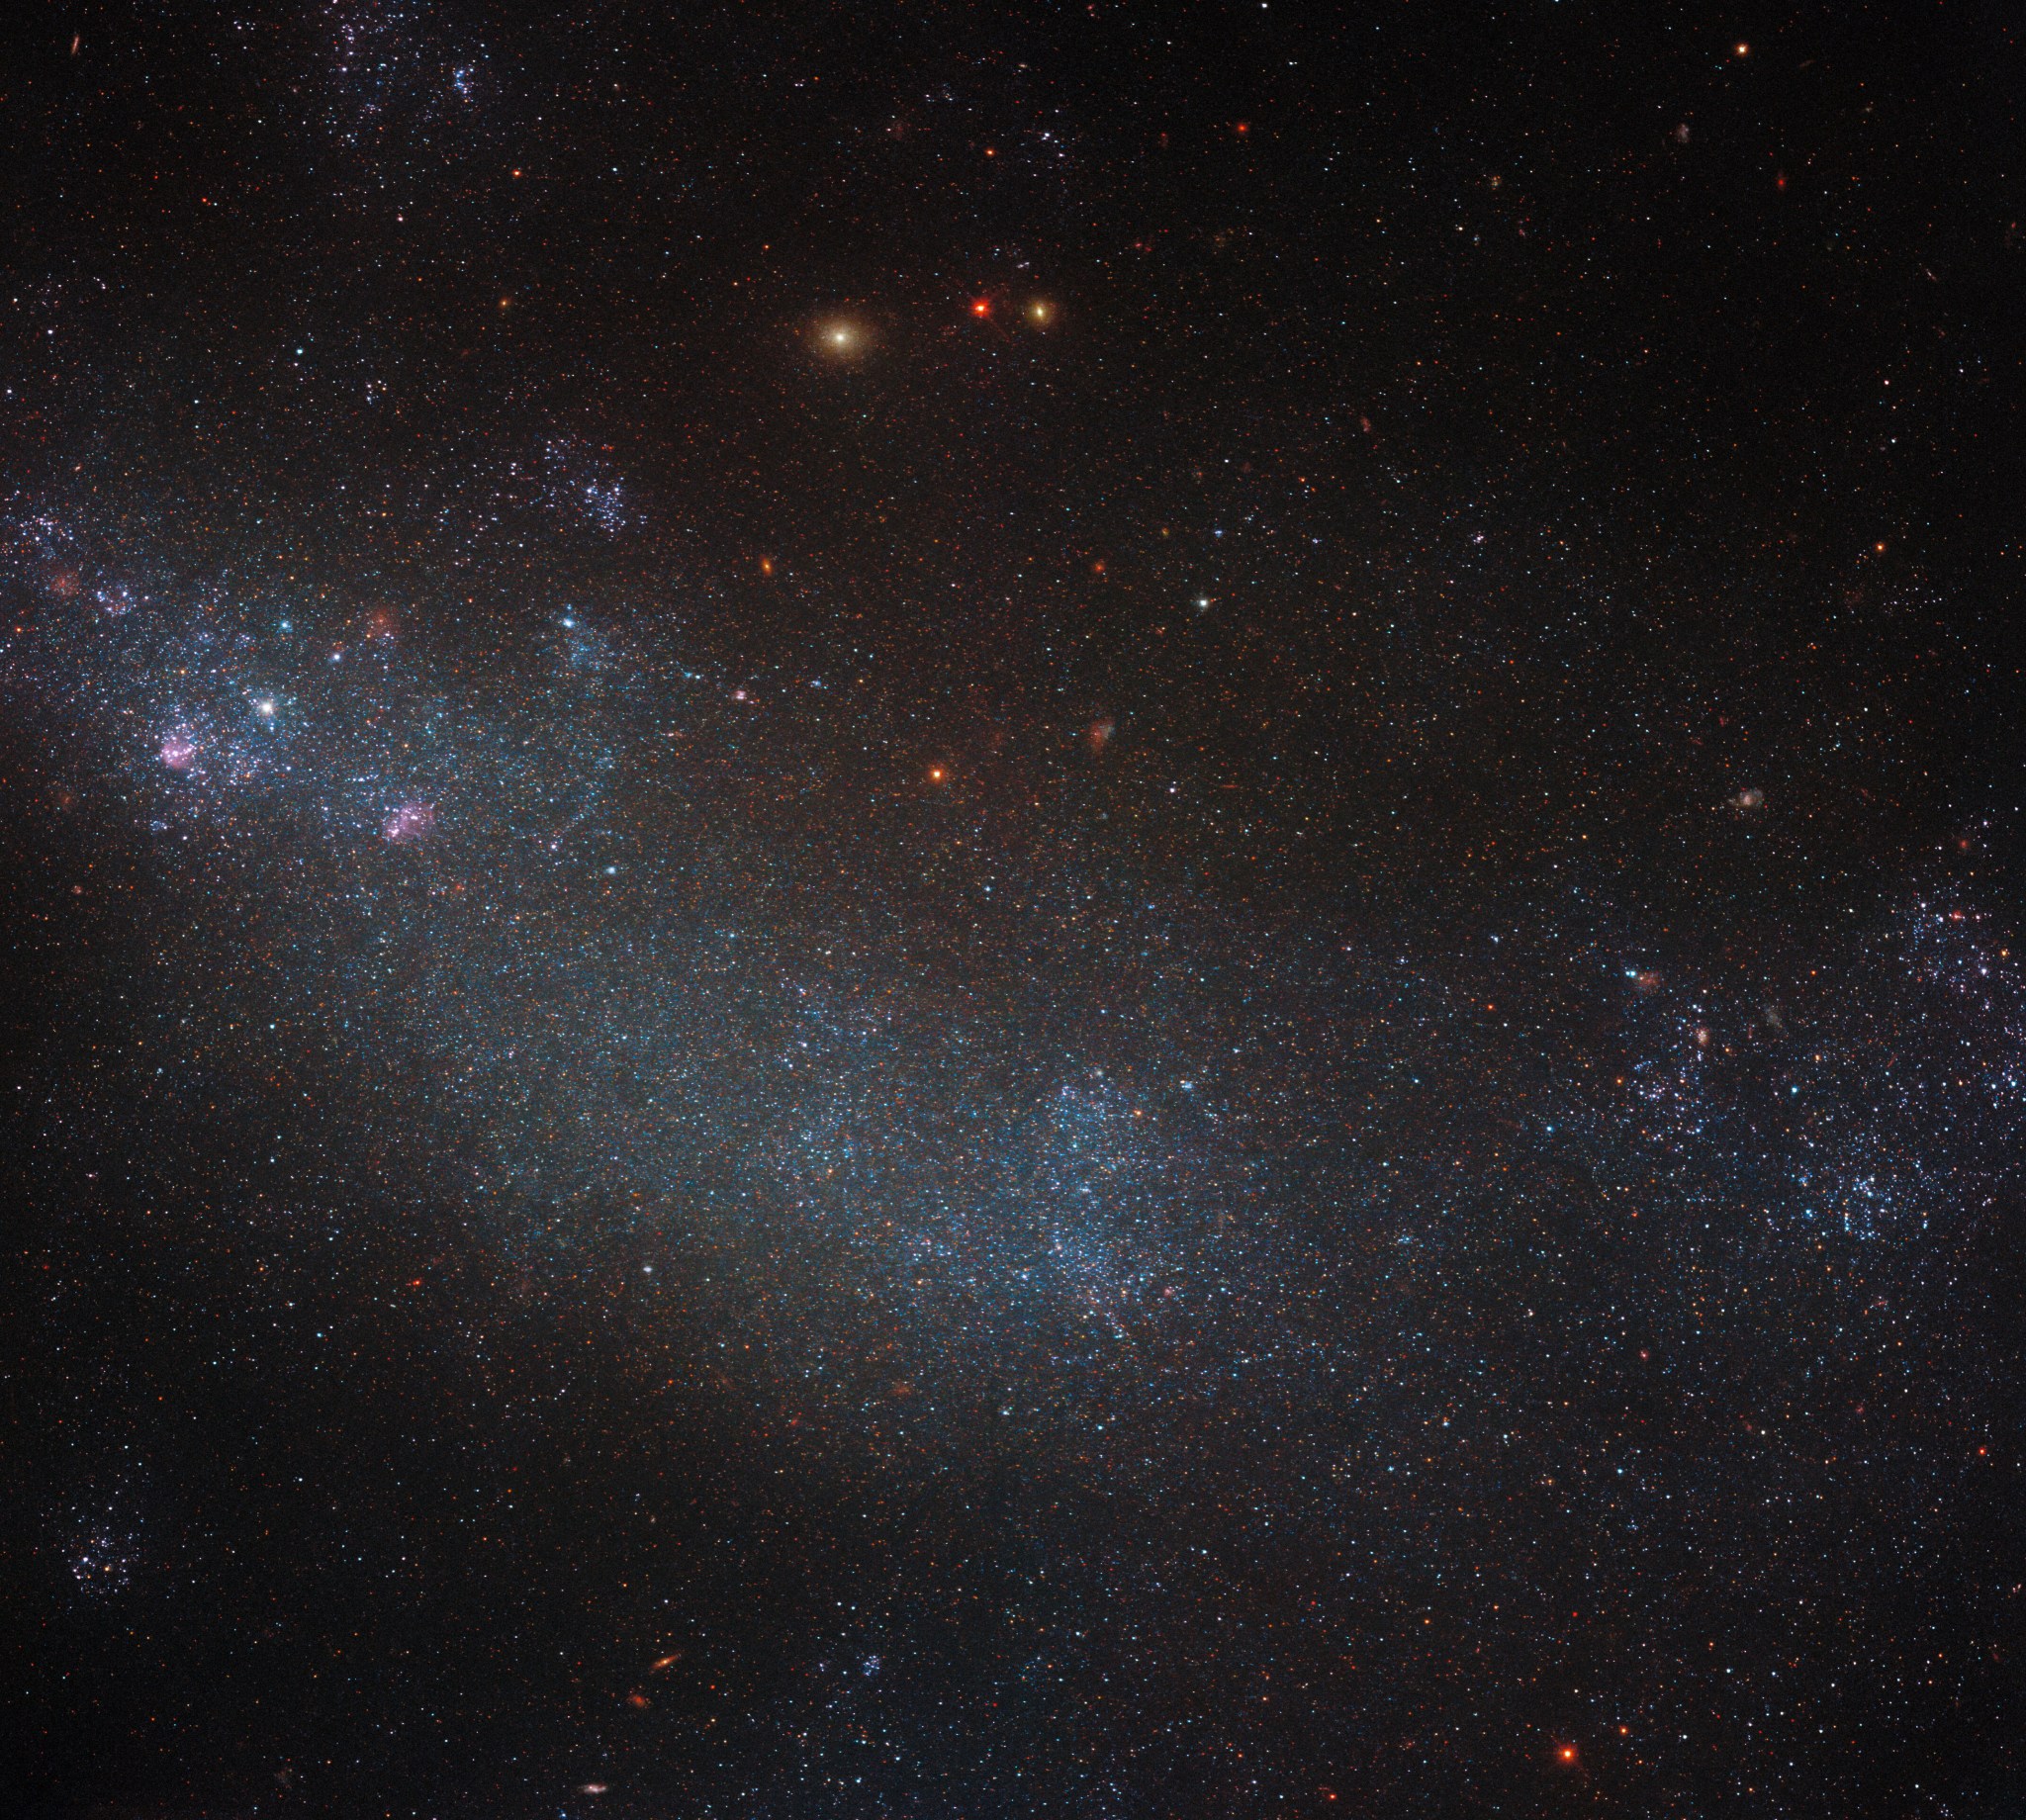 An irregular galaxy: a cloud of tiny, point-like stars on a dark background. The cloud is densest along a broad, curved band across the center of the image. It is colored a faint blue with glowing purplish patches, and the stars grow less dense out to the edges but don't fully vanish. A few distant background galaxies appear among the stars as glowing spots.